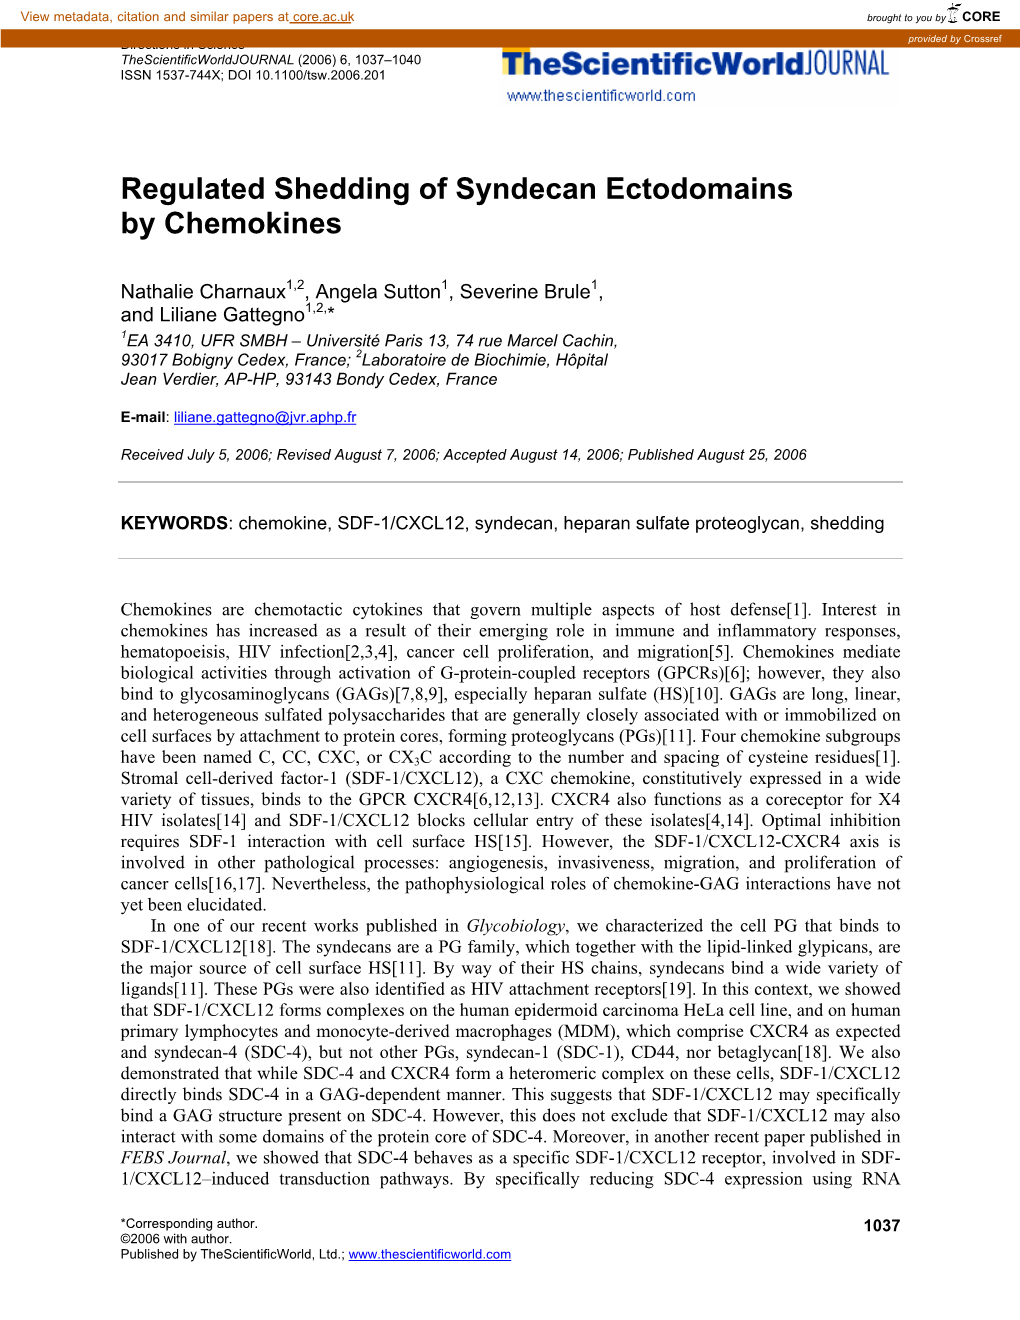 Regulated Shedding of Syndecan Ectodomains by Chemokines